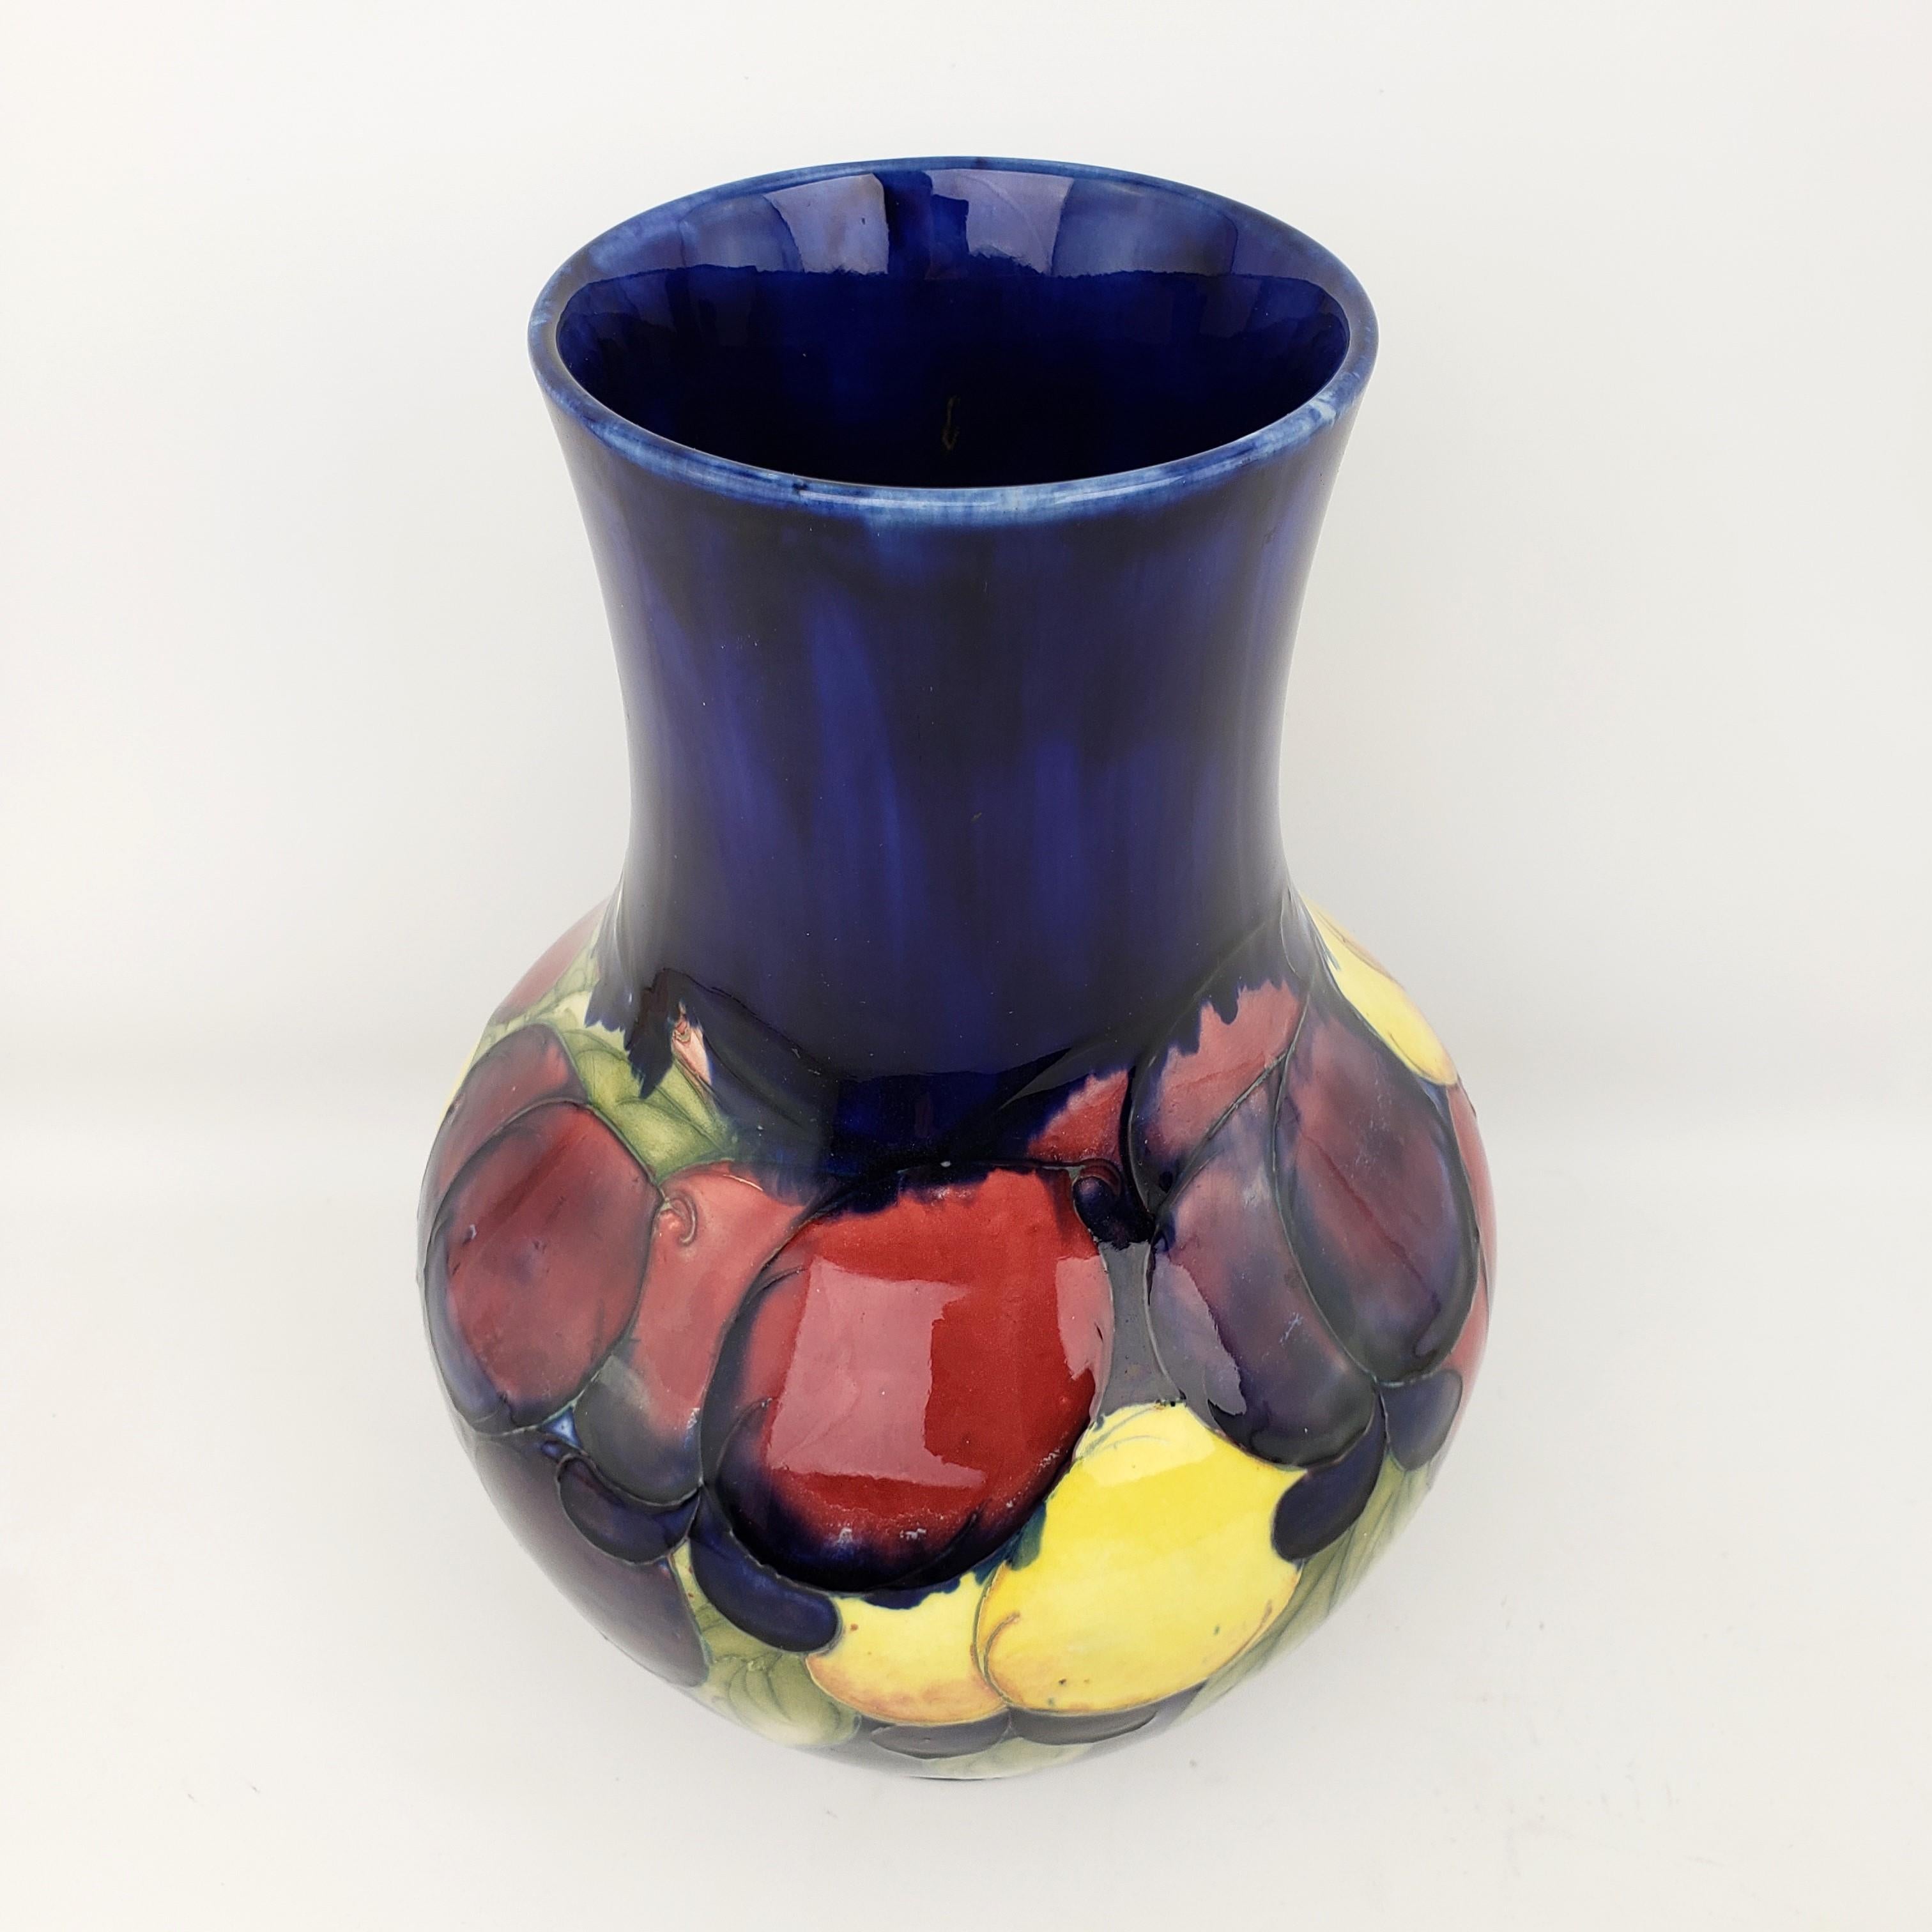 A large size and lovely vase beautifully decorated in 'Wisteria' pattern; designed and produced by William Moorcroft. It features fine tube lining and rich colours on a deep cobalt blue ground.